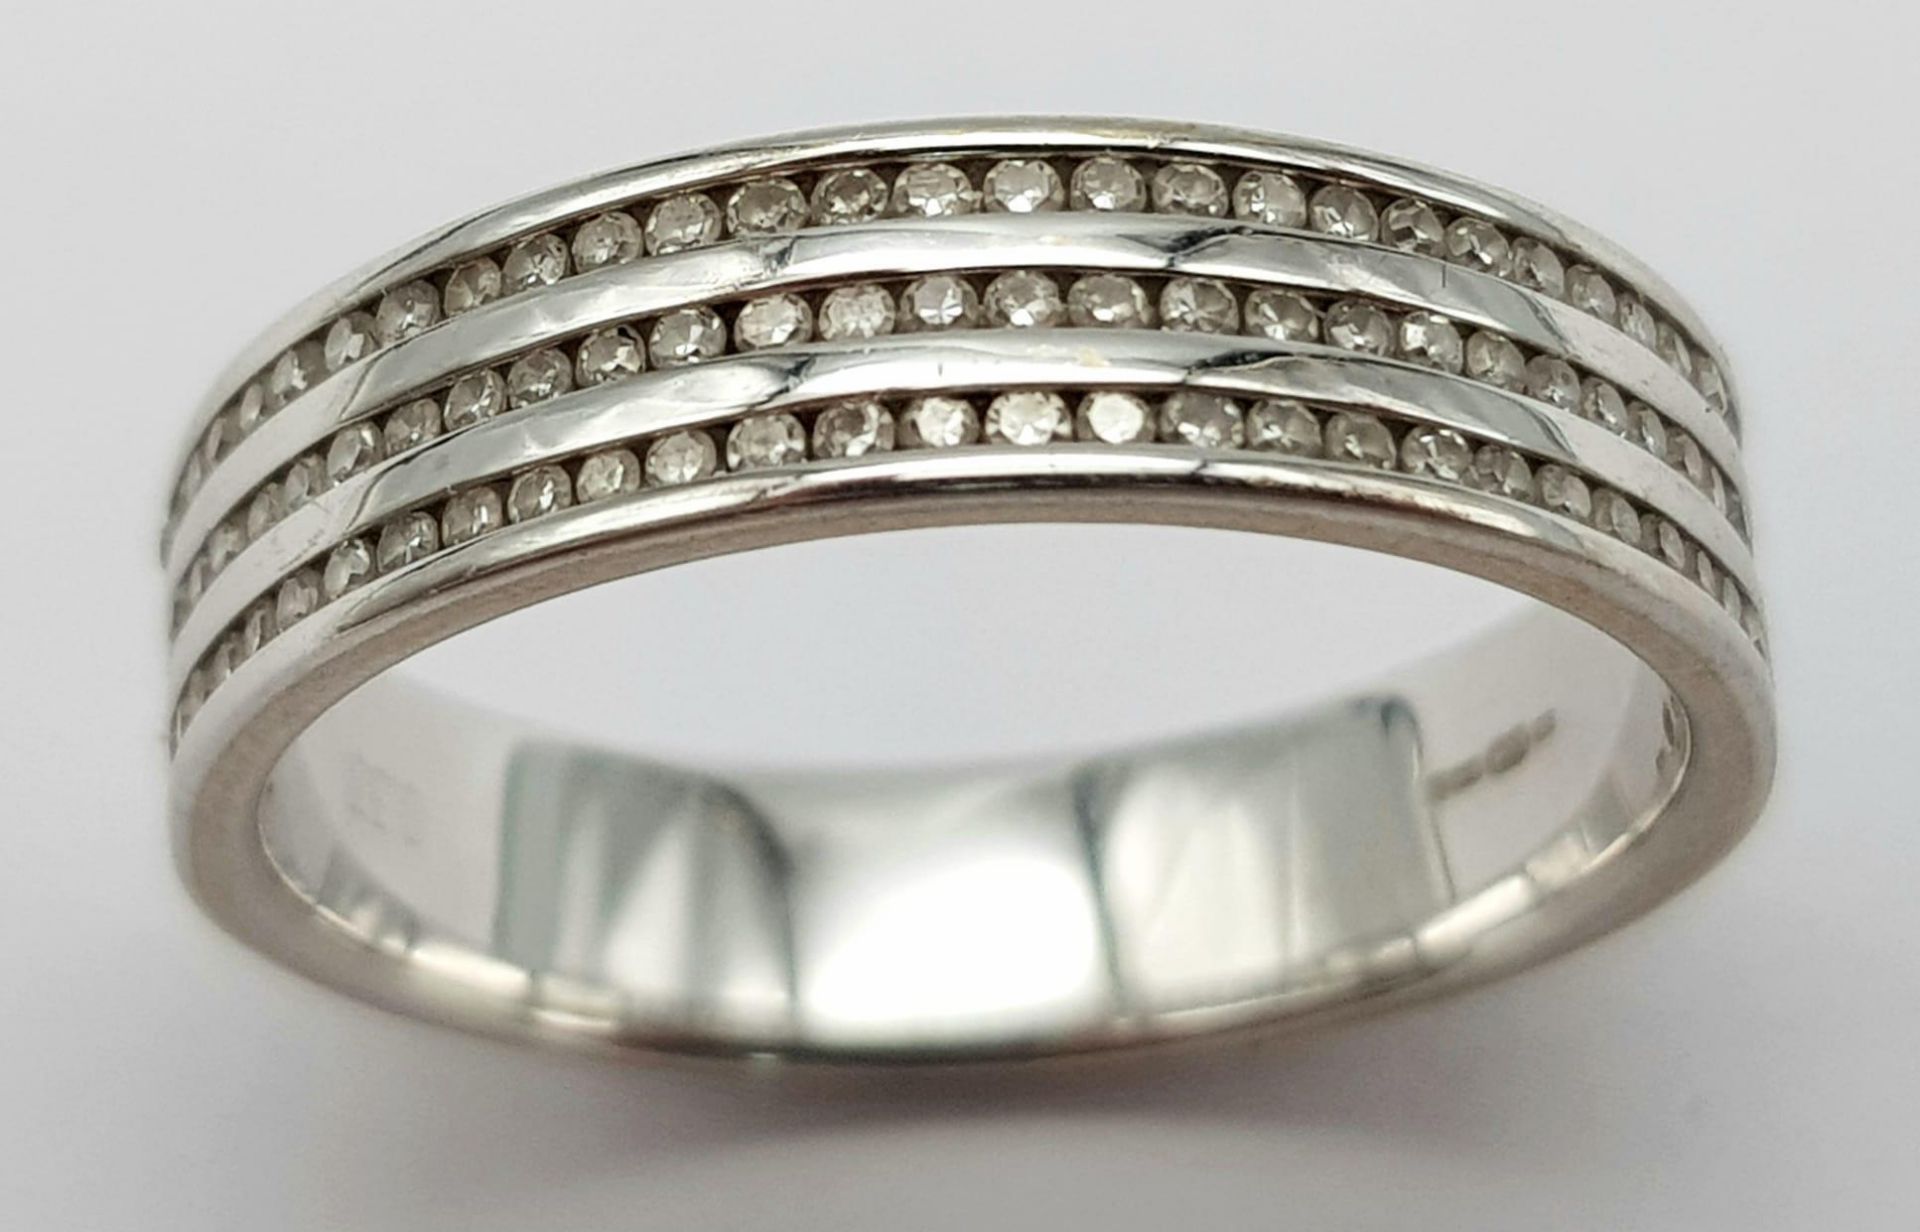 An 18K White Gold Triple Row Diamond Half Eternity Ring. 0.48ctw. Size P. 4.7g total weight. - Image 2 of 5